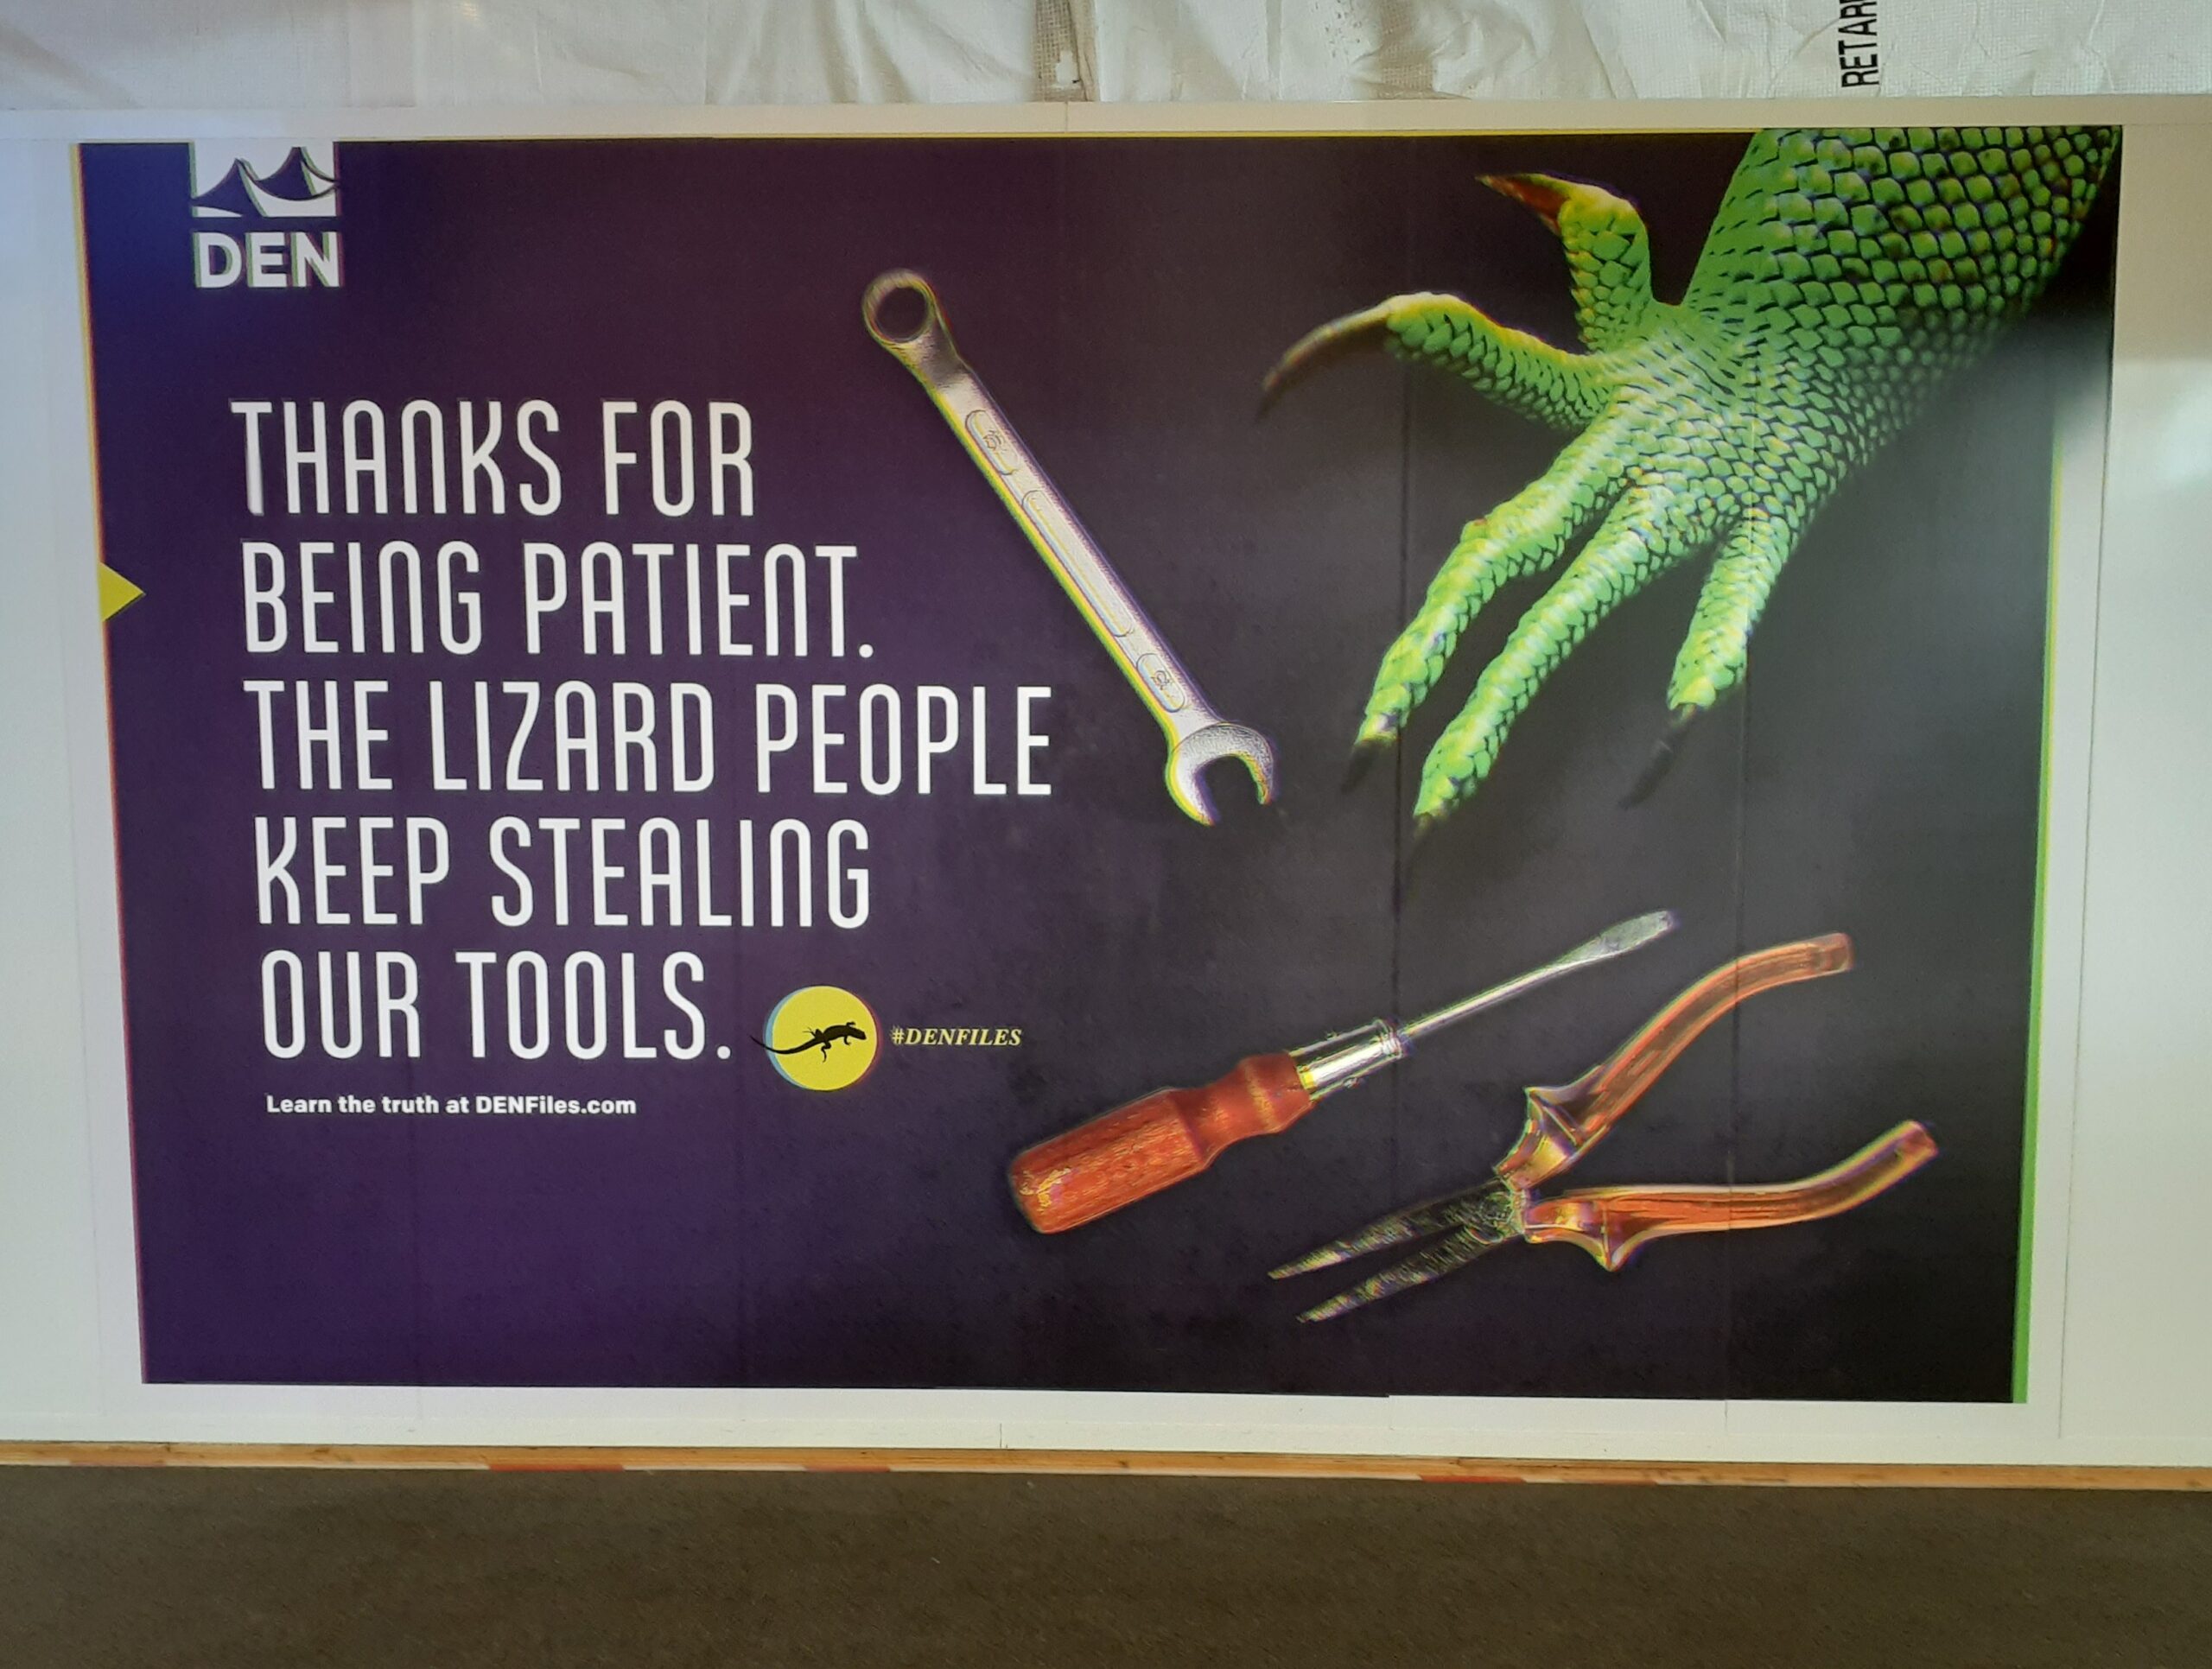 a wrench screwdriver and pliers are on the floor and a lizard hand is grabbing at them. Text reads "thanks for the patience the lizard people keep stealing our tools." #DENFILES